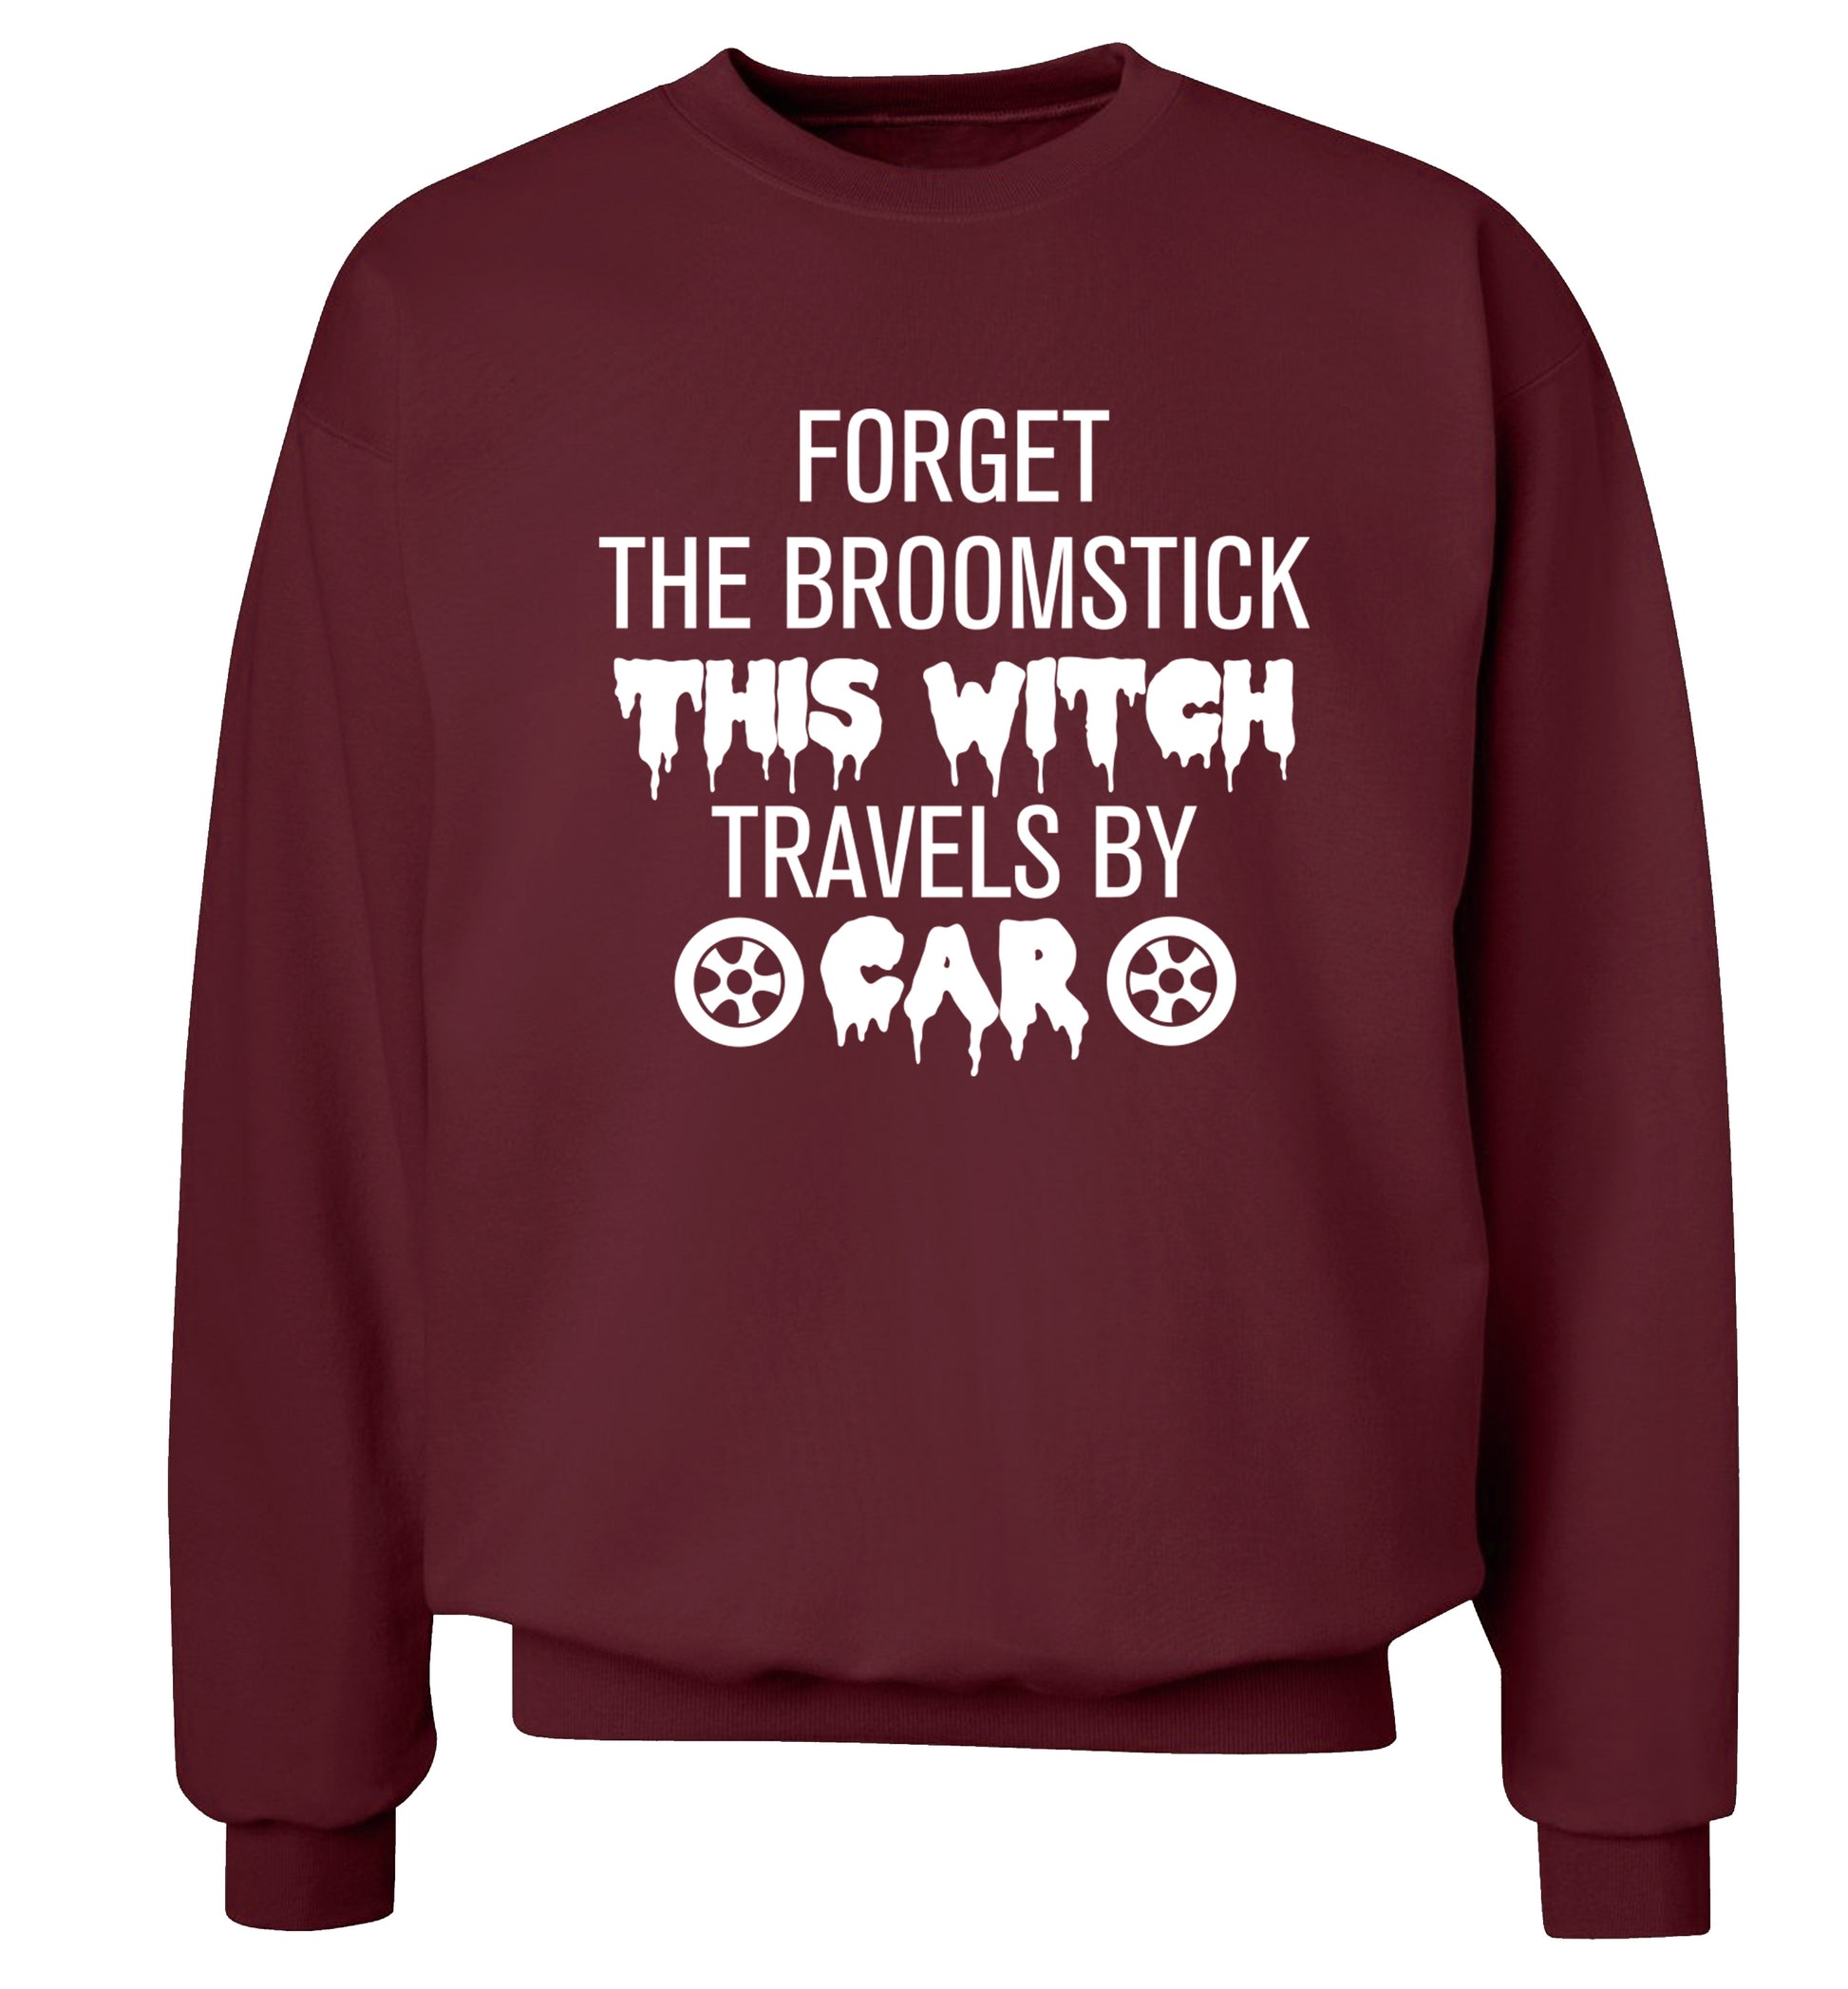 Forget the broomstick this witch travels by car Adult's unisexmaroon Sweater 2XL